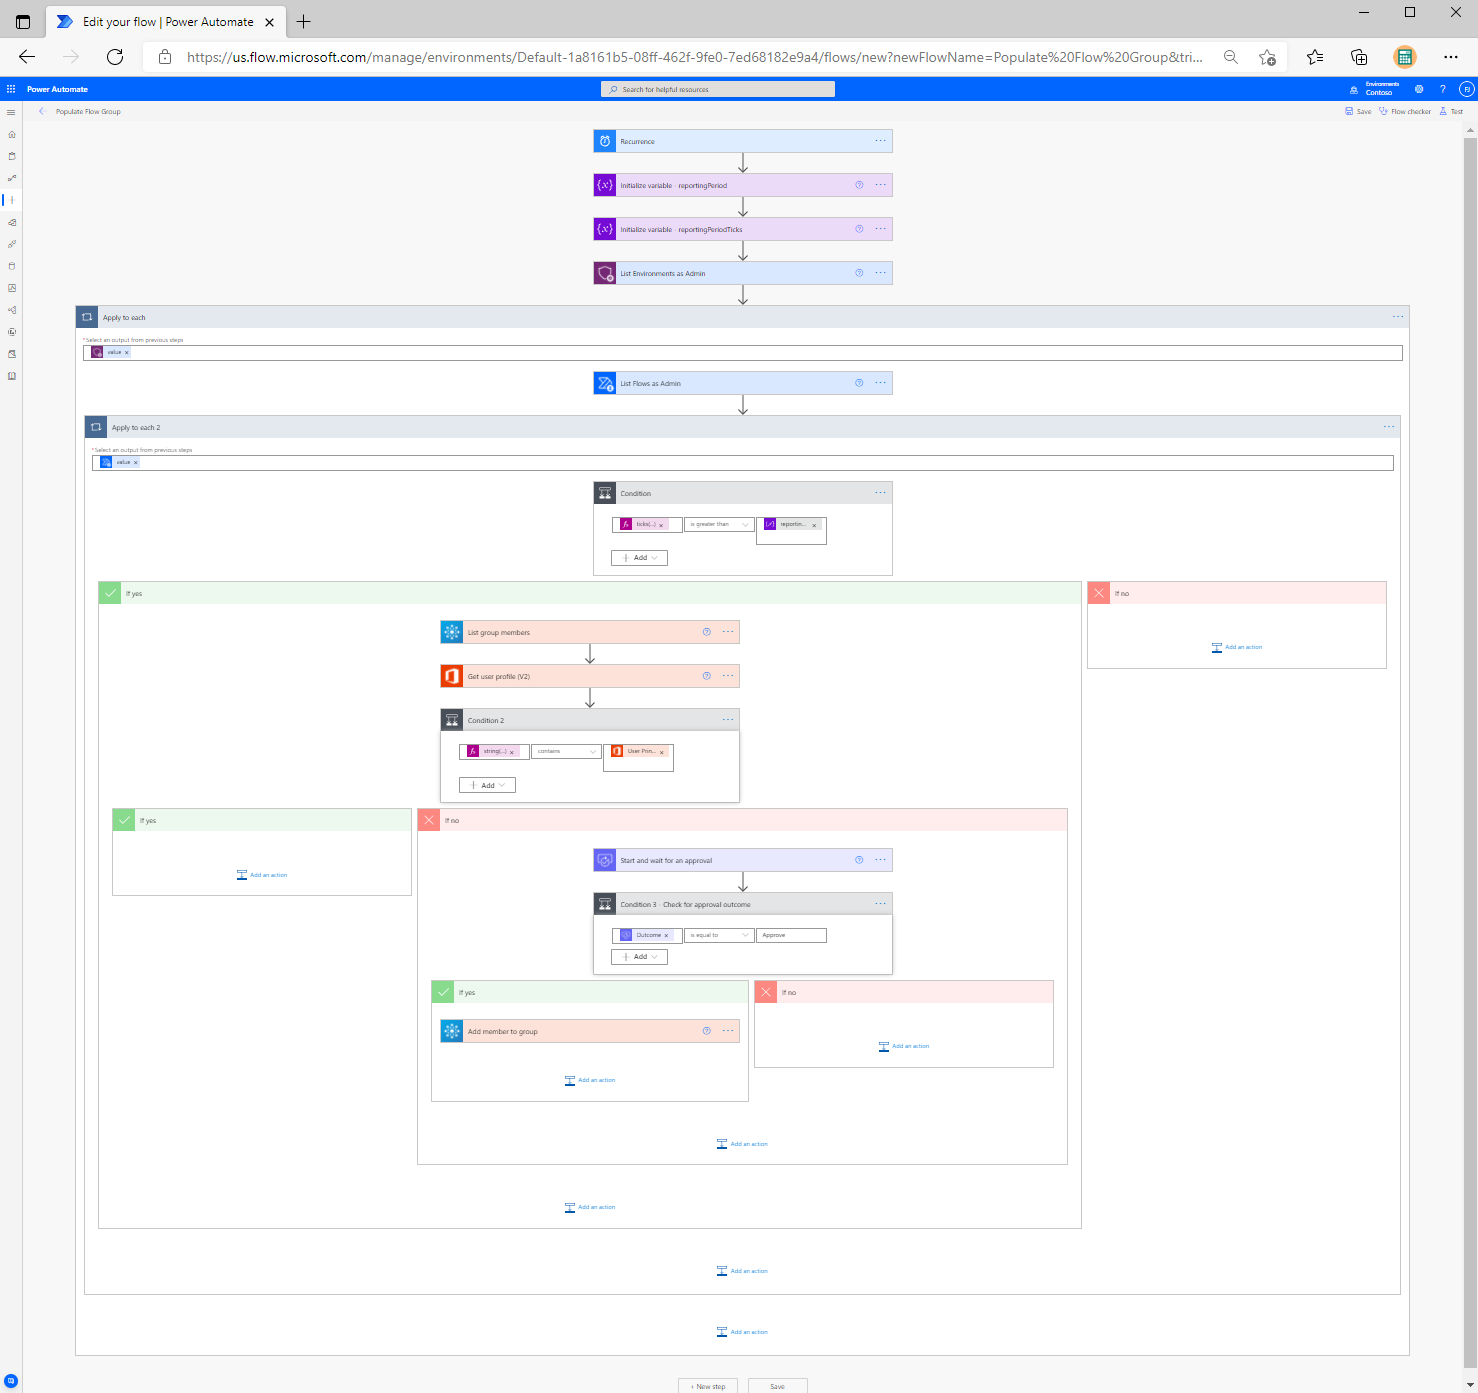 Screenshot of the Power Automate My flows page showing the completed flow.